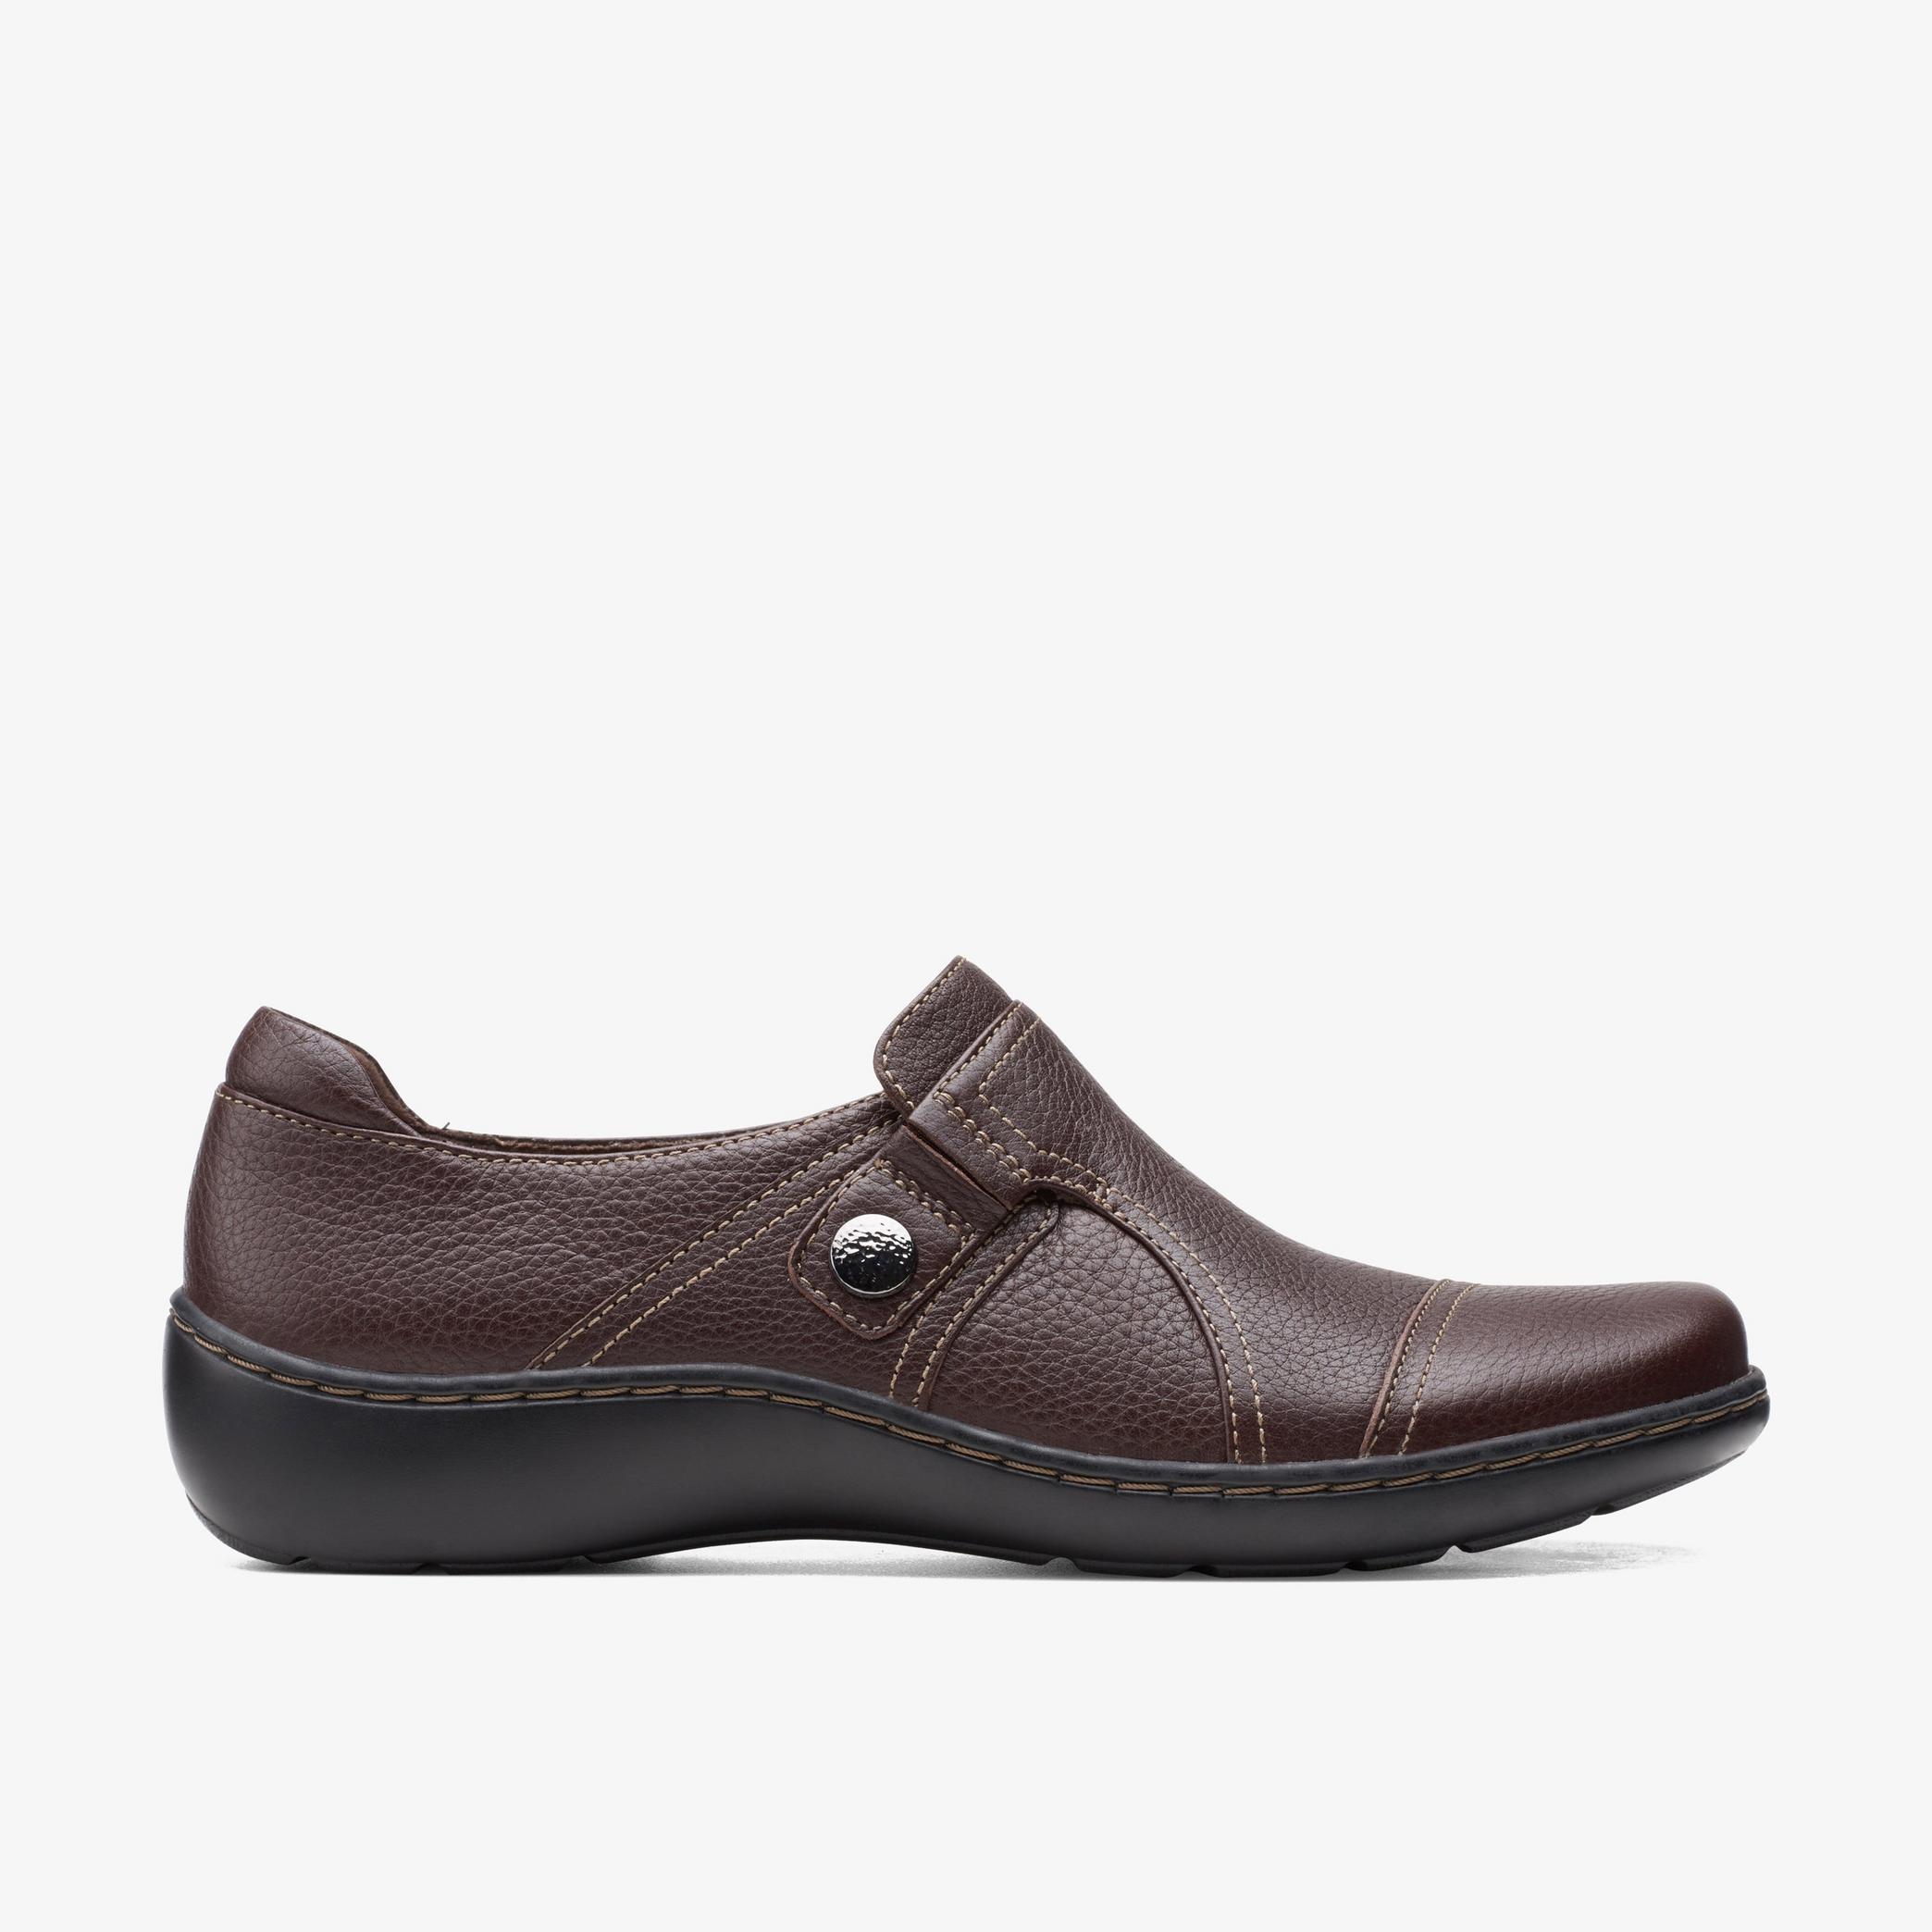 Womens Cora Poppy Dark Brown Tumbled Slip On Shoes | Clarks Outlet